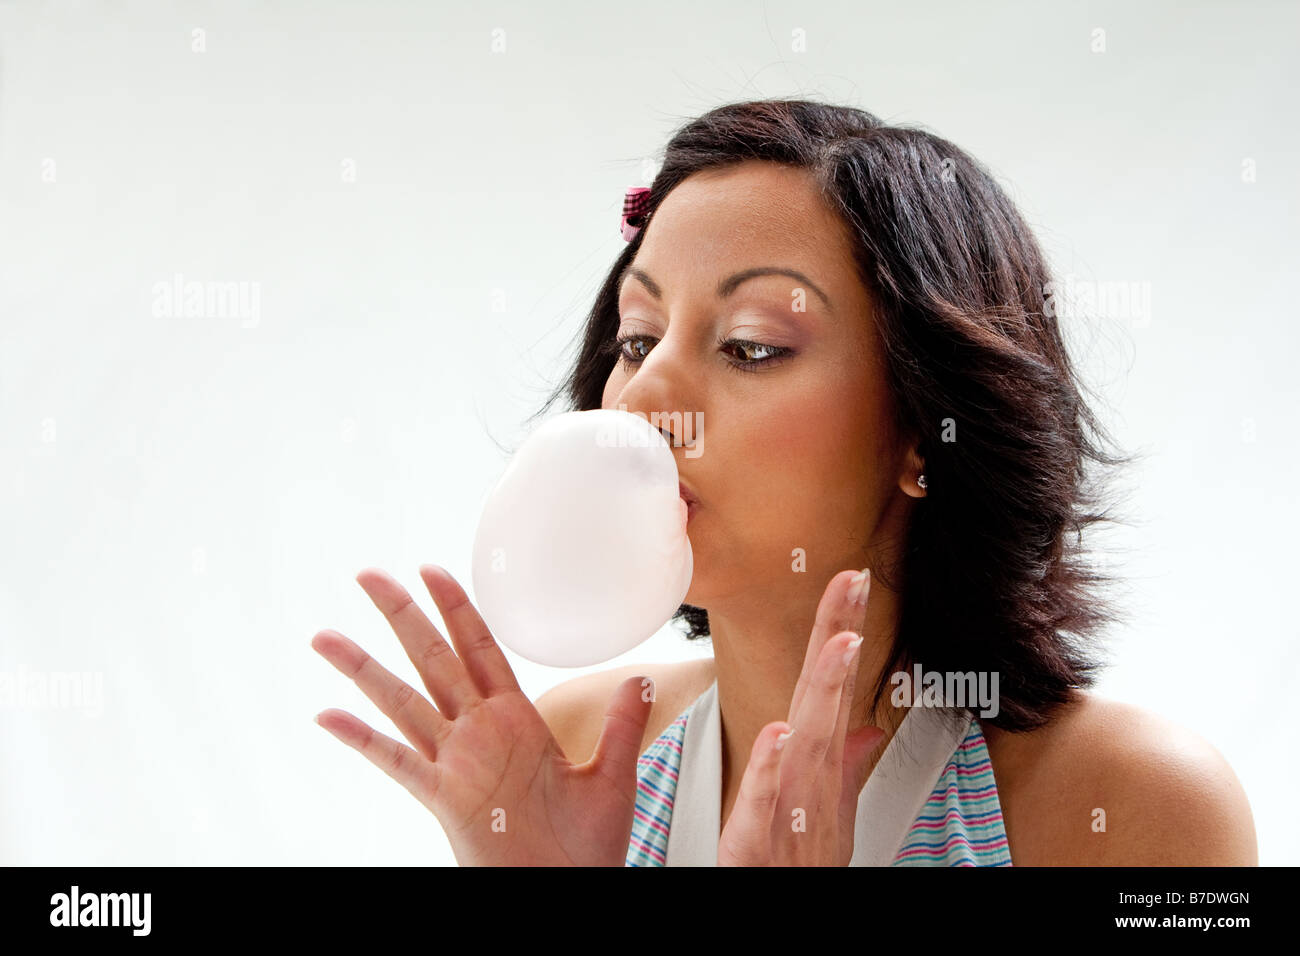 Beautiful Latina girl with crossed eyes blowing a bubblegum bubble isolated Stock Photo